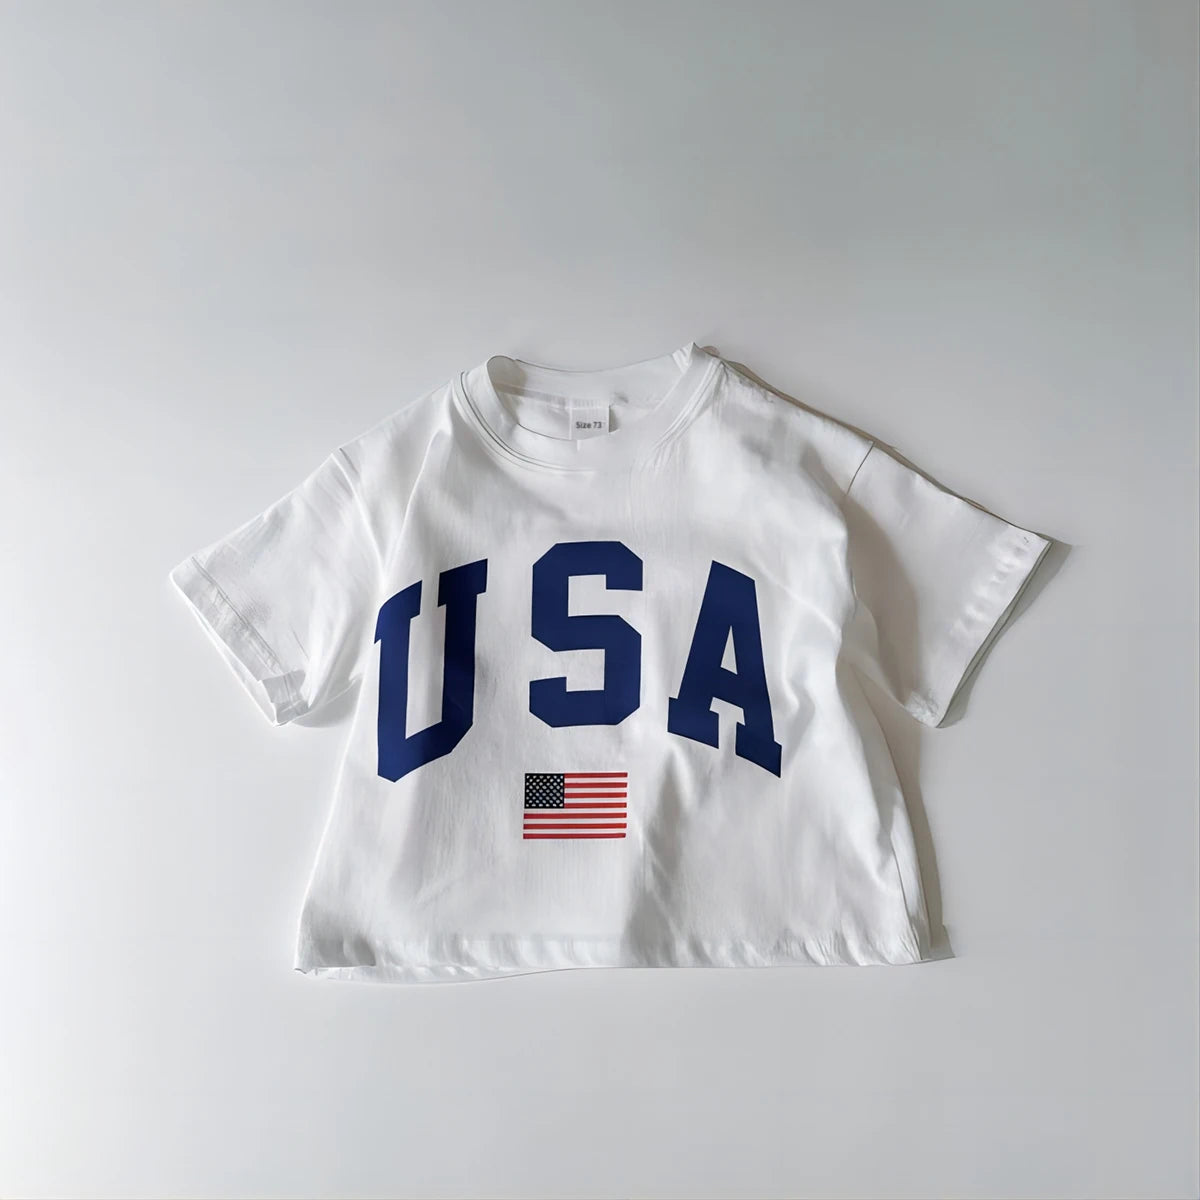 Emma Oversized USA Print Cotton Casual Tops Infant Outfit